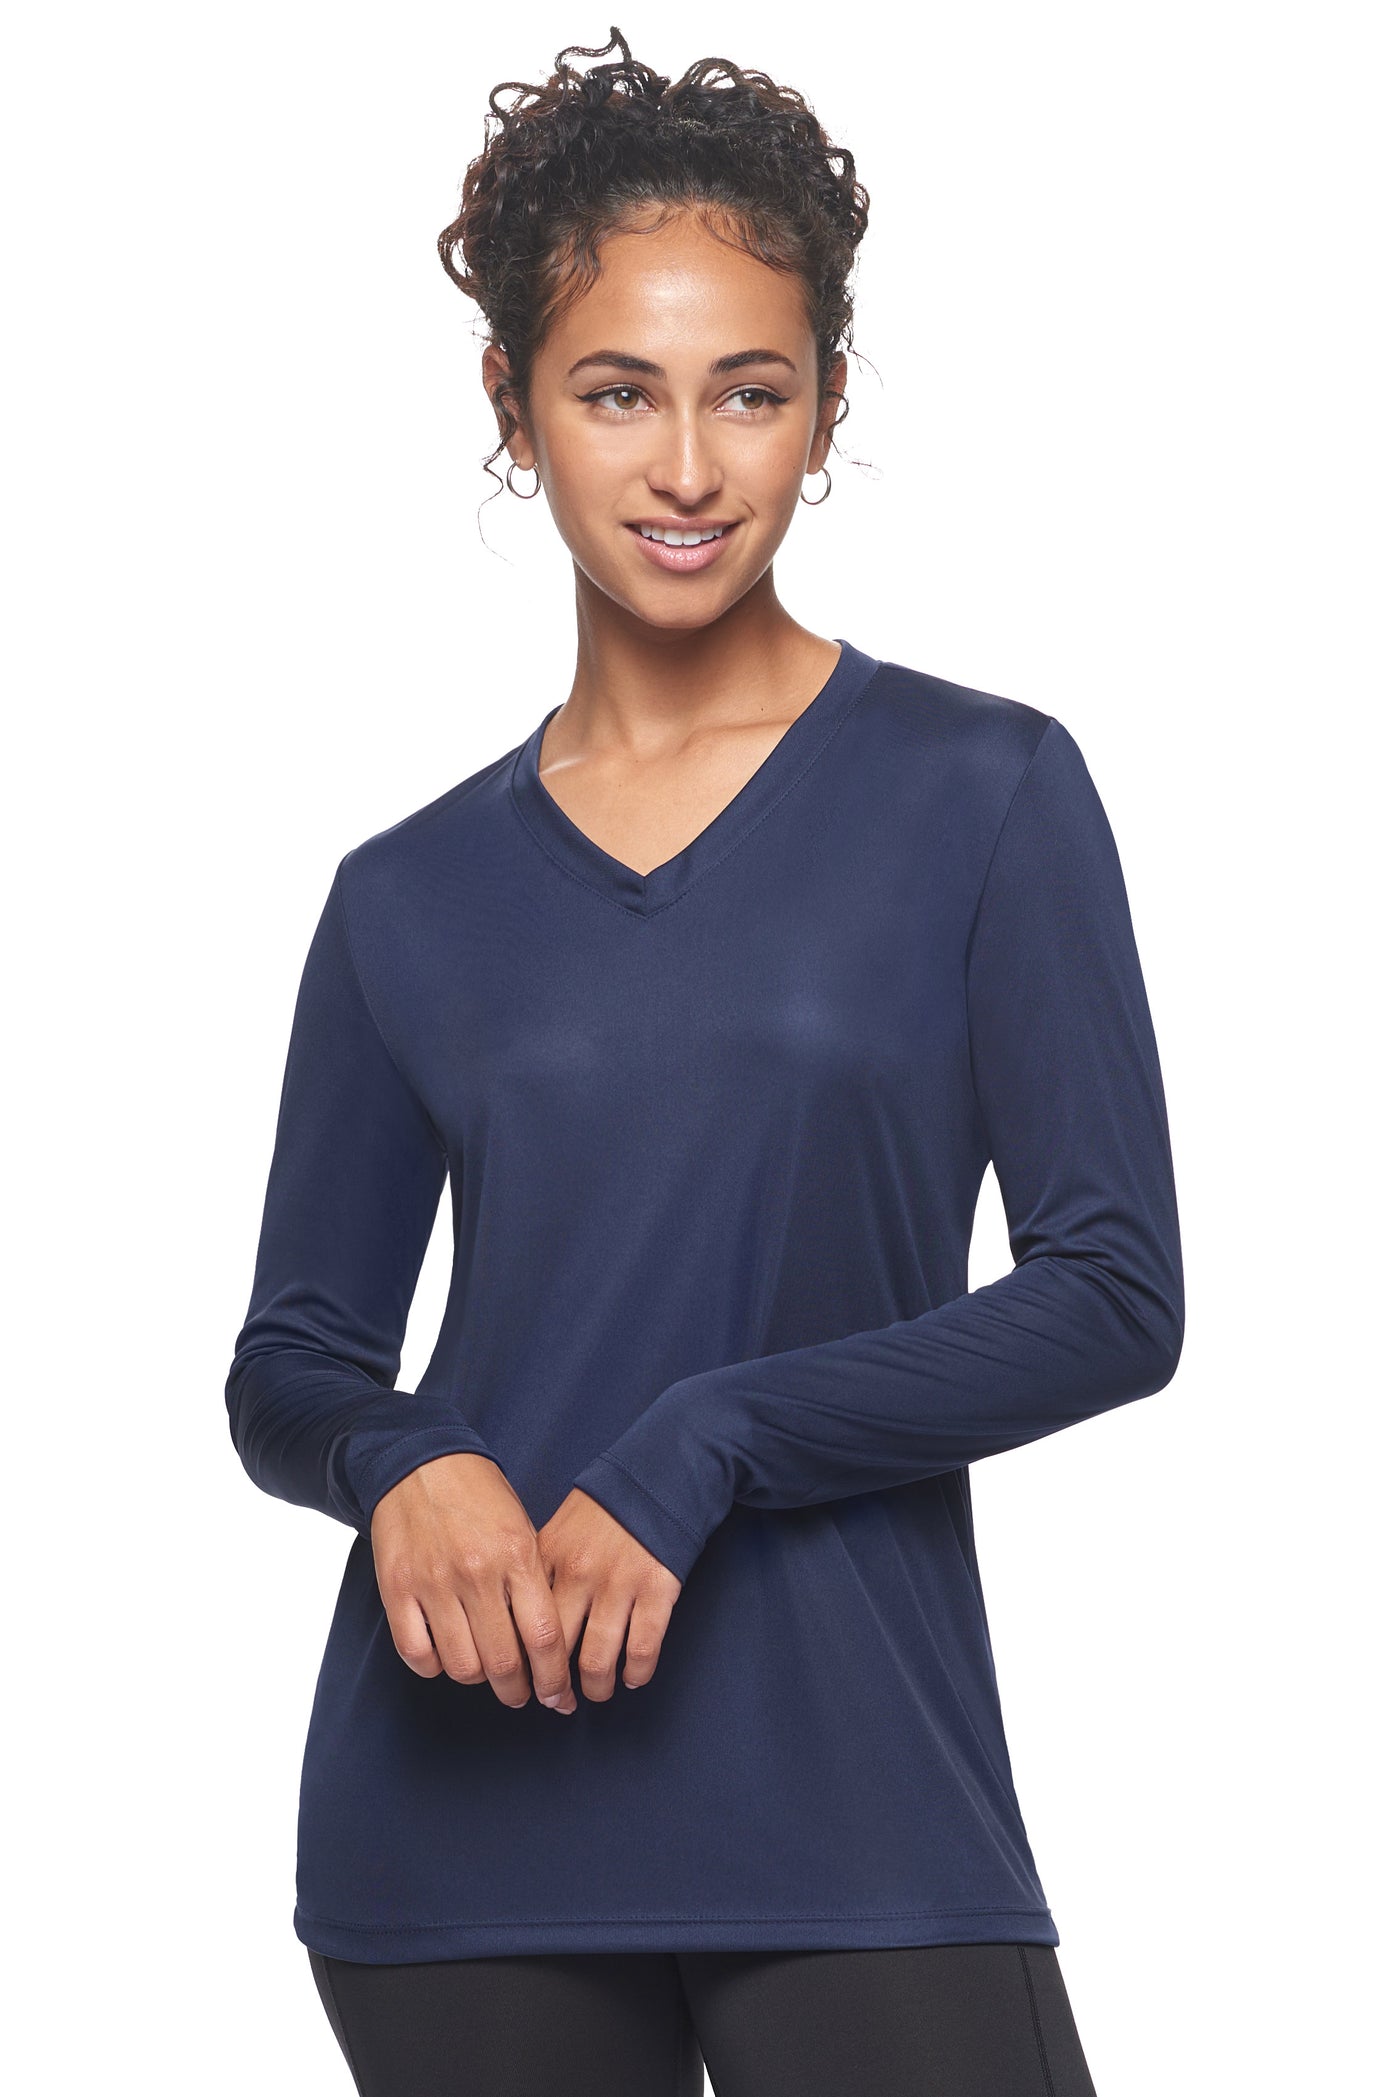 Expert Brand Retail Womens Activewear Womens Sportswear Made in USA Long Sleeve Tec Tee Runners Tee V Neck Navy Blue#color_navy